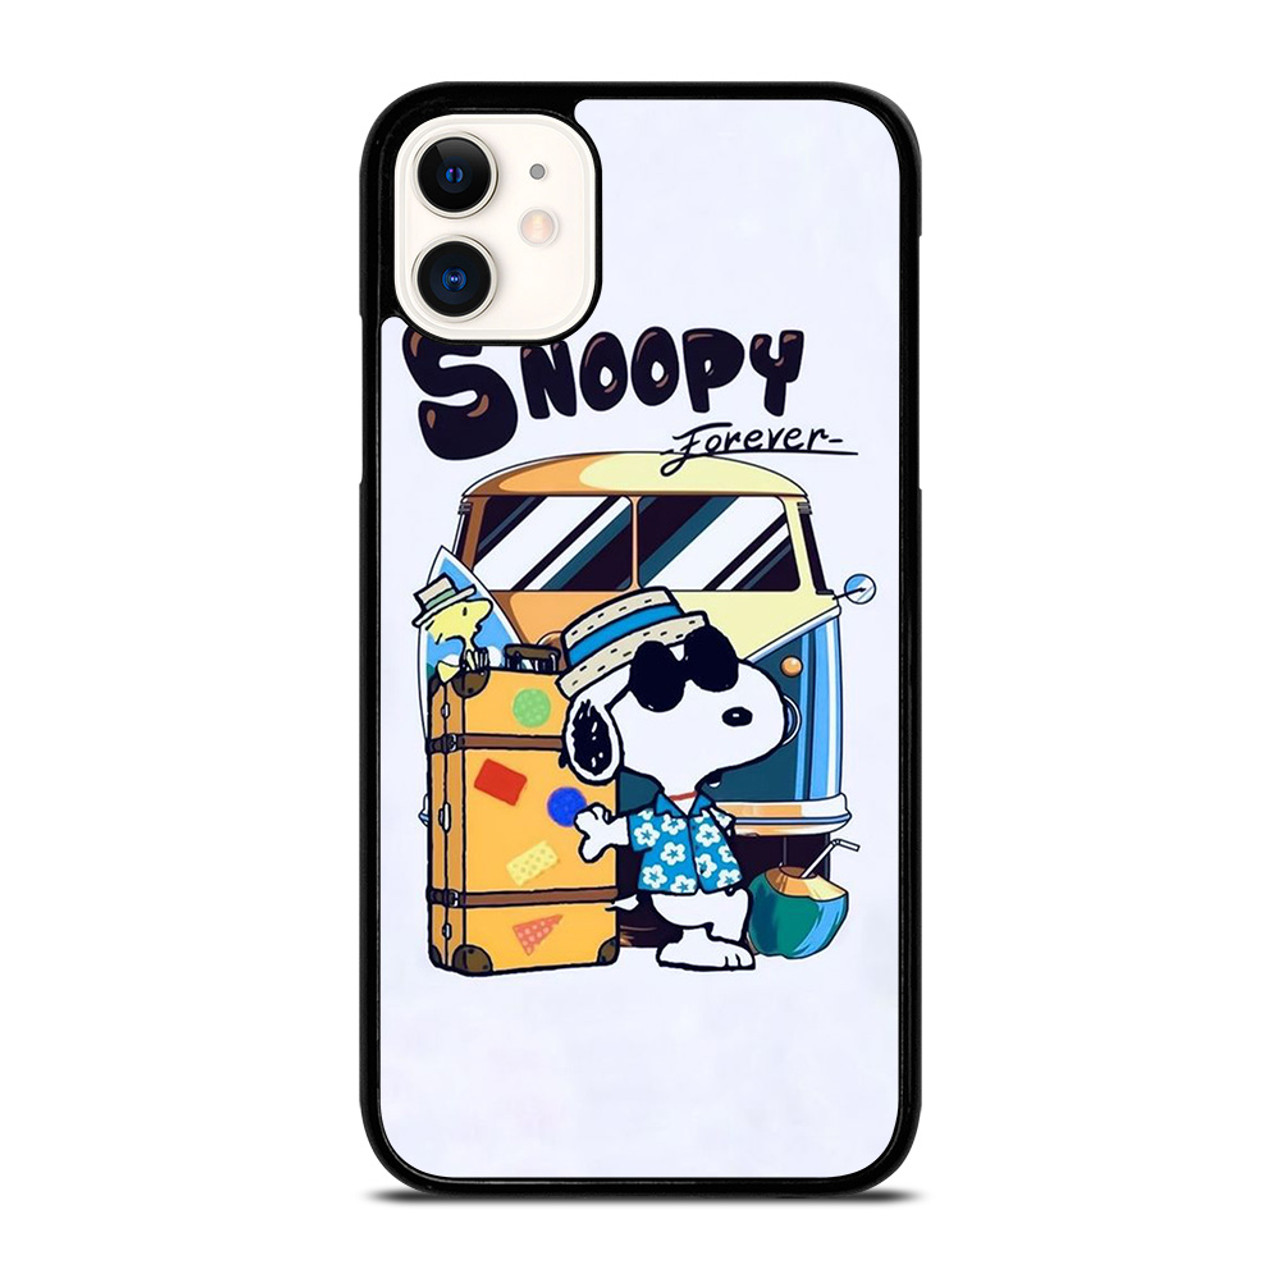 https://cdn11.bigcommerce.com/s-i3fxbqbw58/images/stencil/1280x1280/products/273978/324116/SNOOPY%20THE%20PEANUTS%20CHARLIE%20BROWN%20CARTOON%20FOREVER__95506.1692156261.jpg?c=1